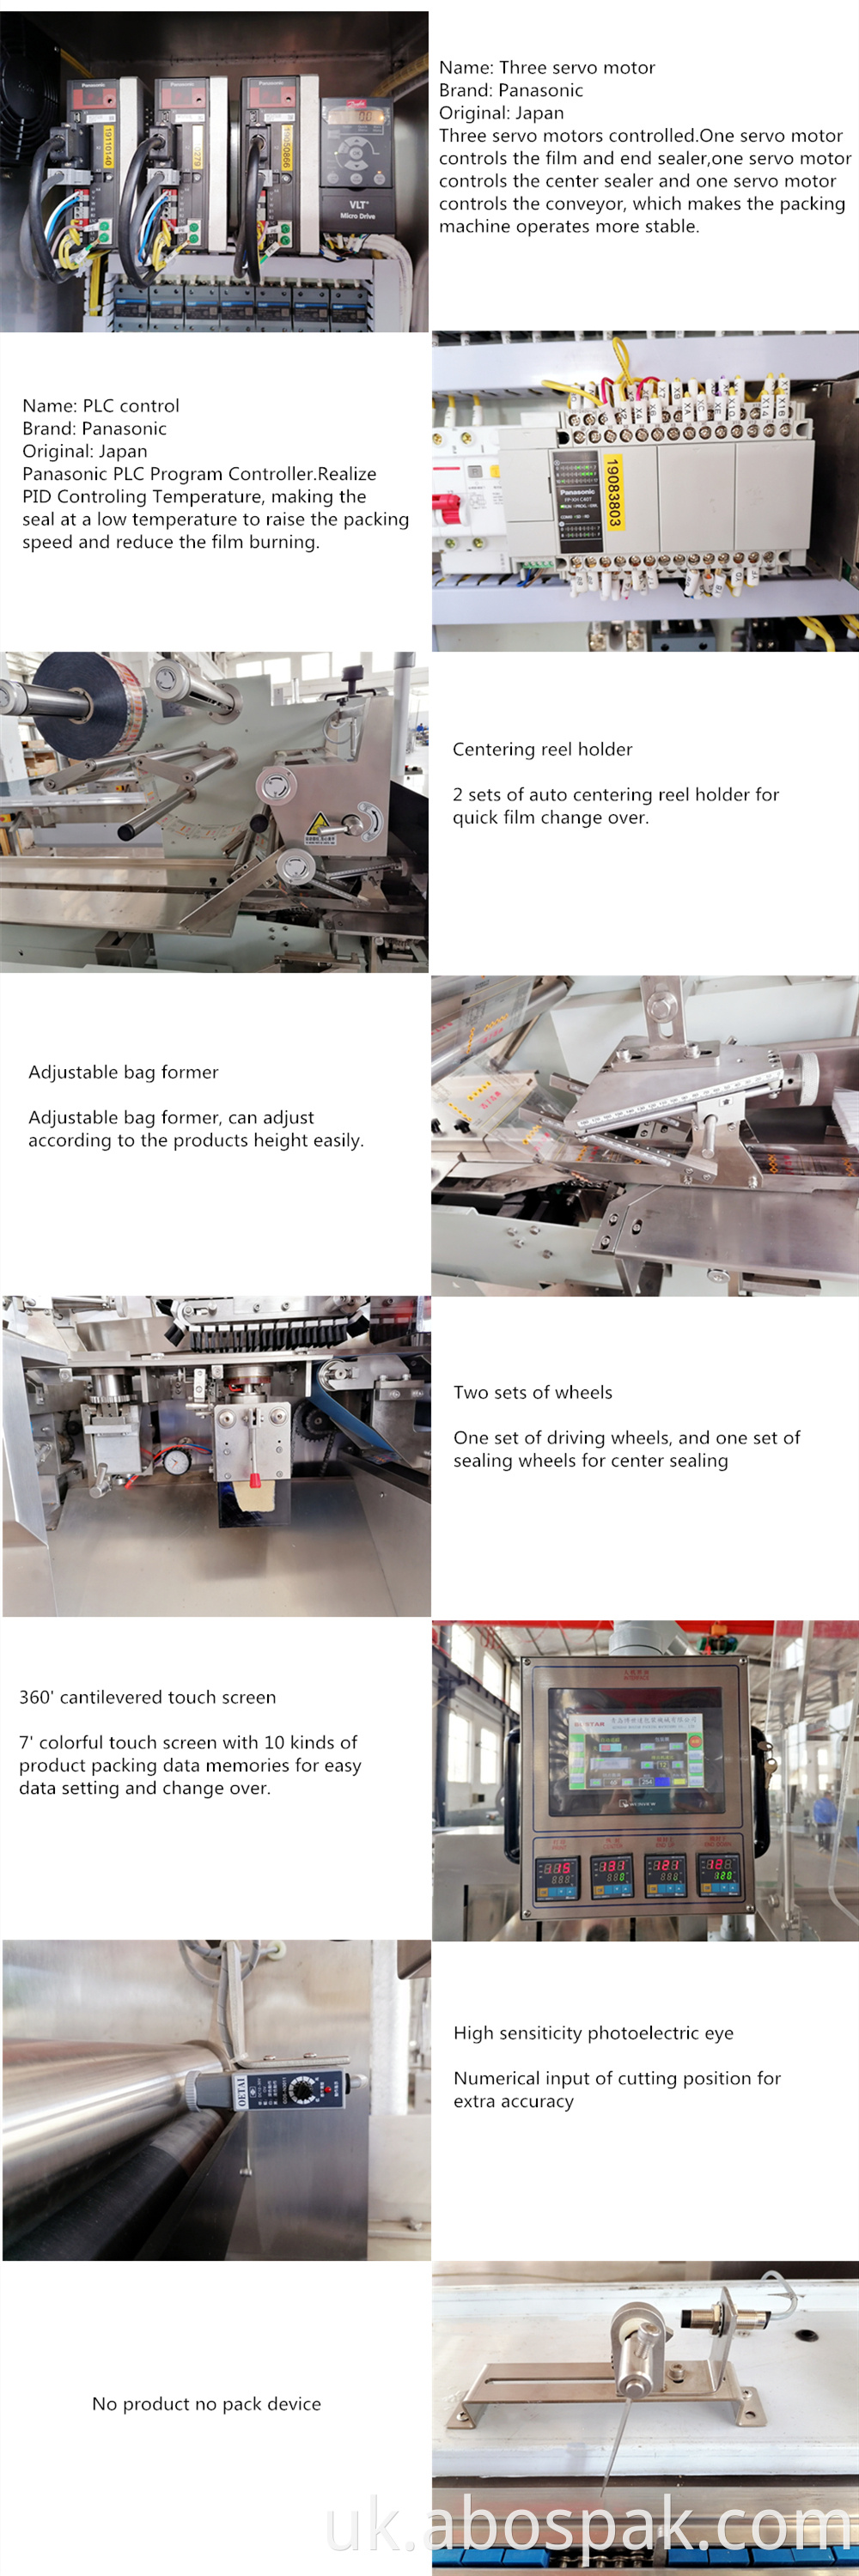 detailed specification of burger packing machinery